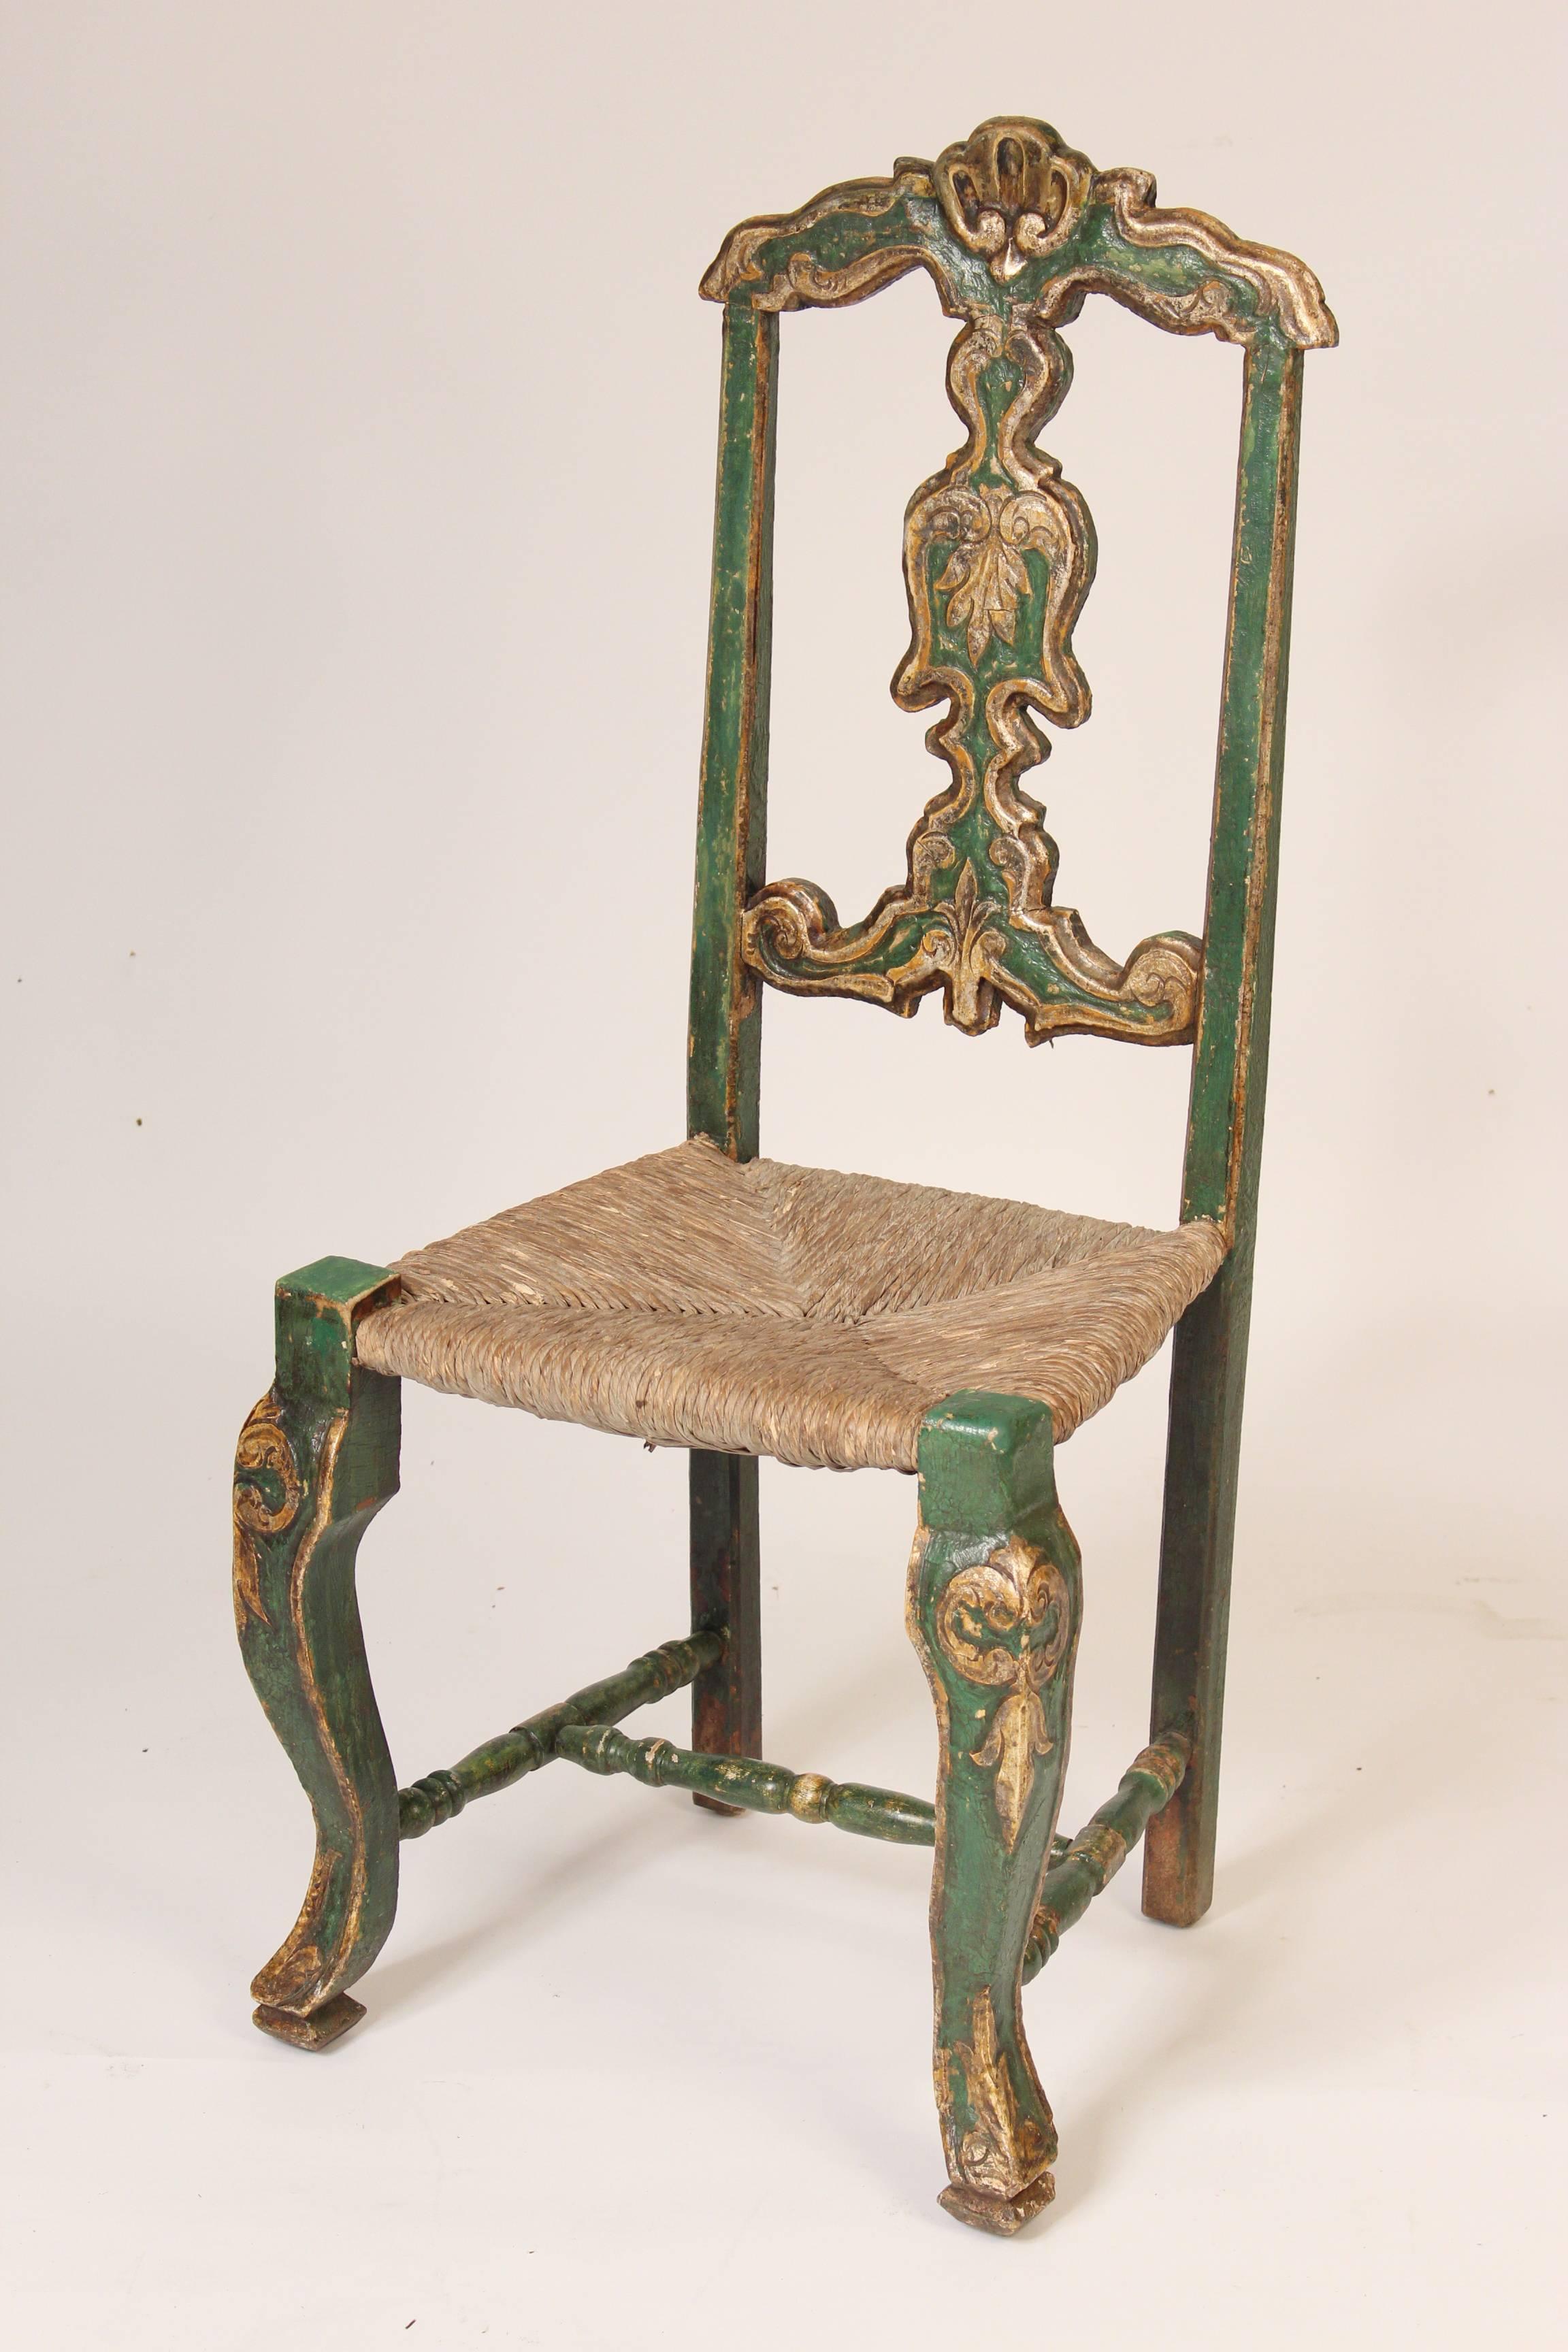 Set of six green painted and silver leaf continental (probably Spanish or Portuguese) dining room chairs with rush seats, 19th century.